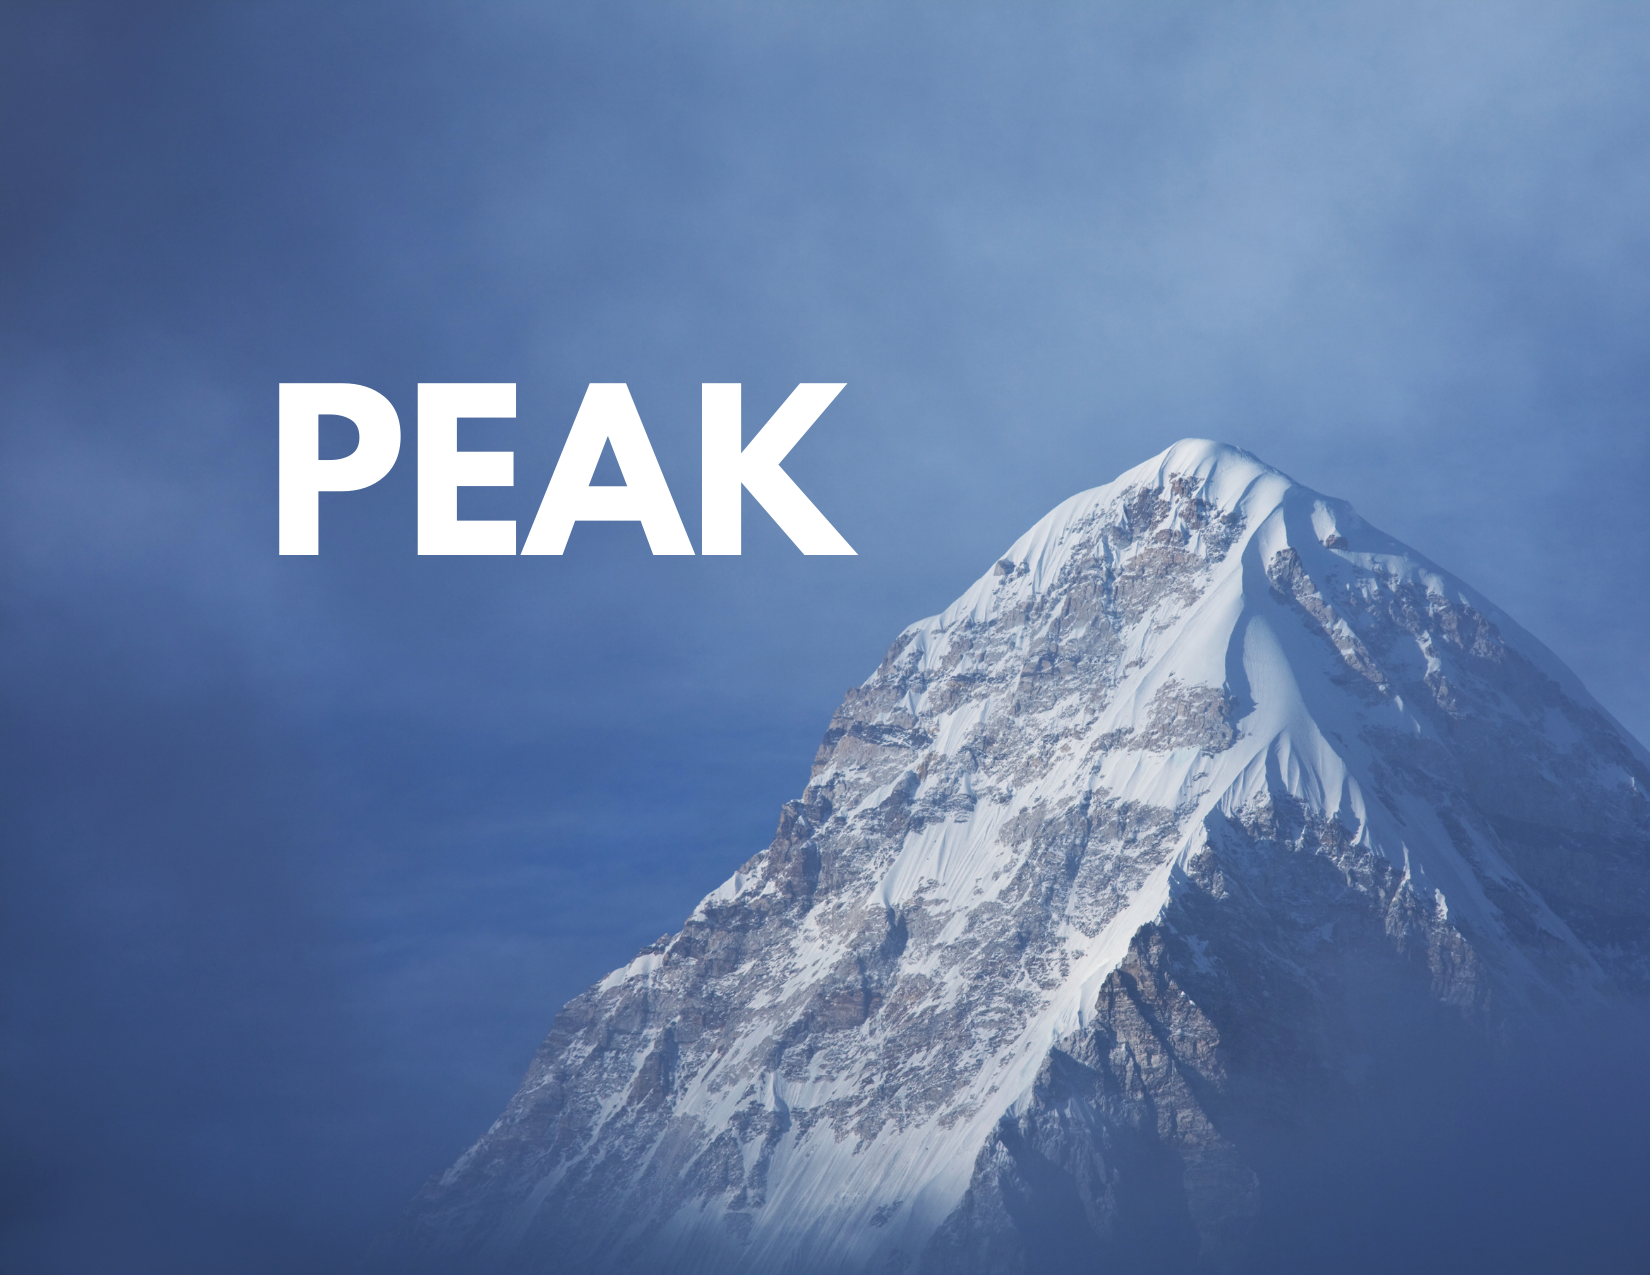 A picture of a mountain peak with the caption "Peak"